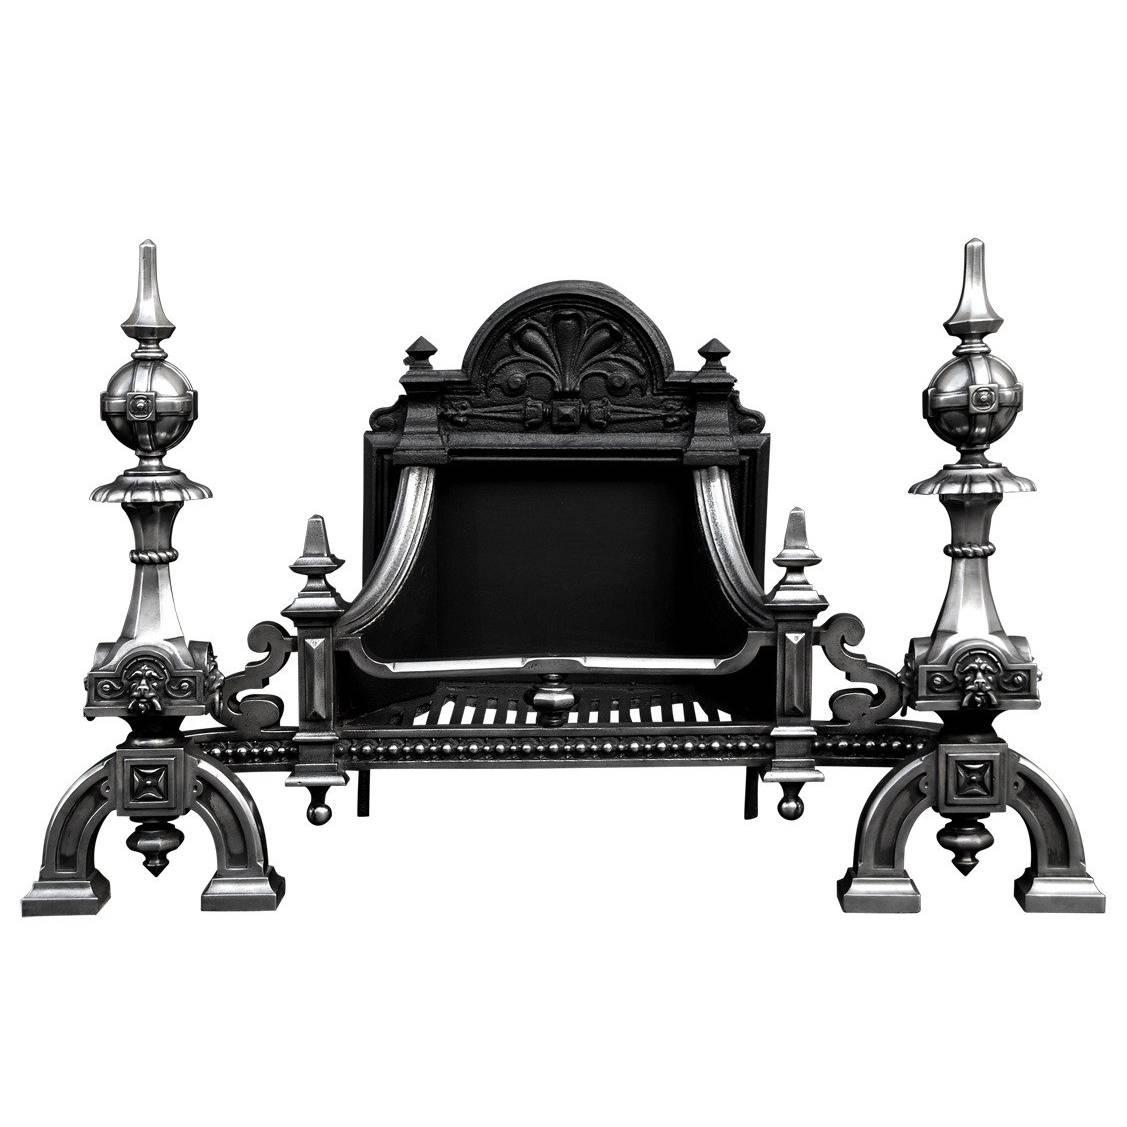 Polished Cast Iron Fire Basket in the Baroque Style